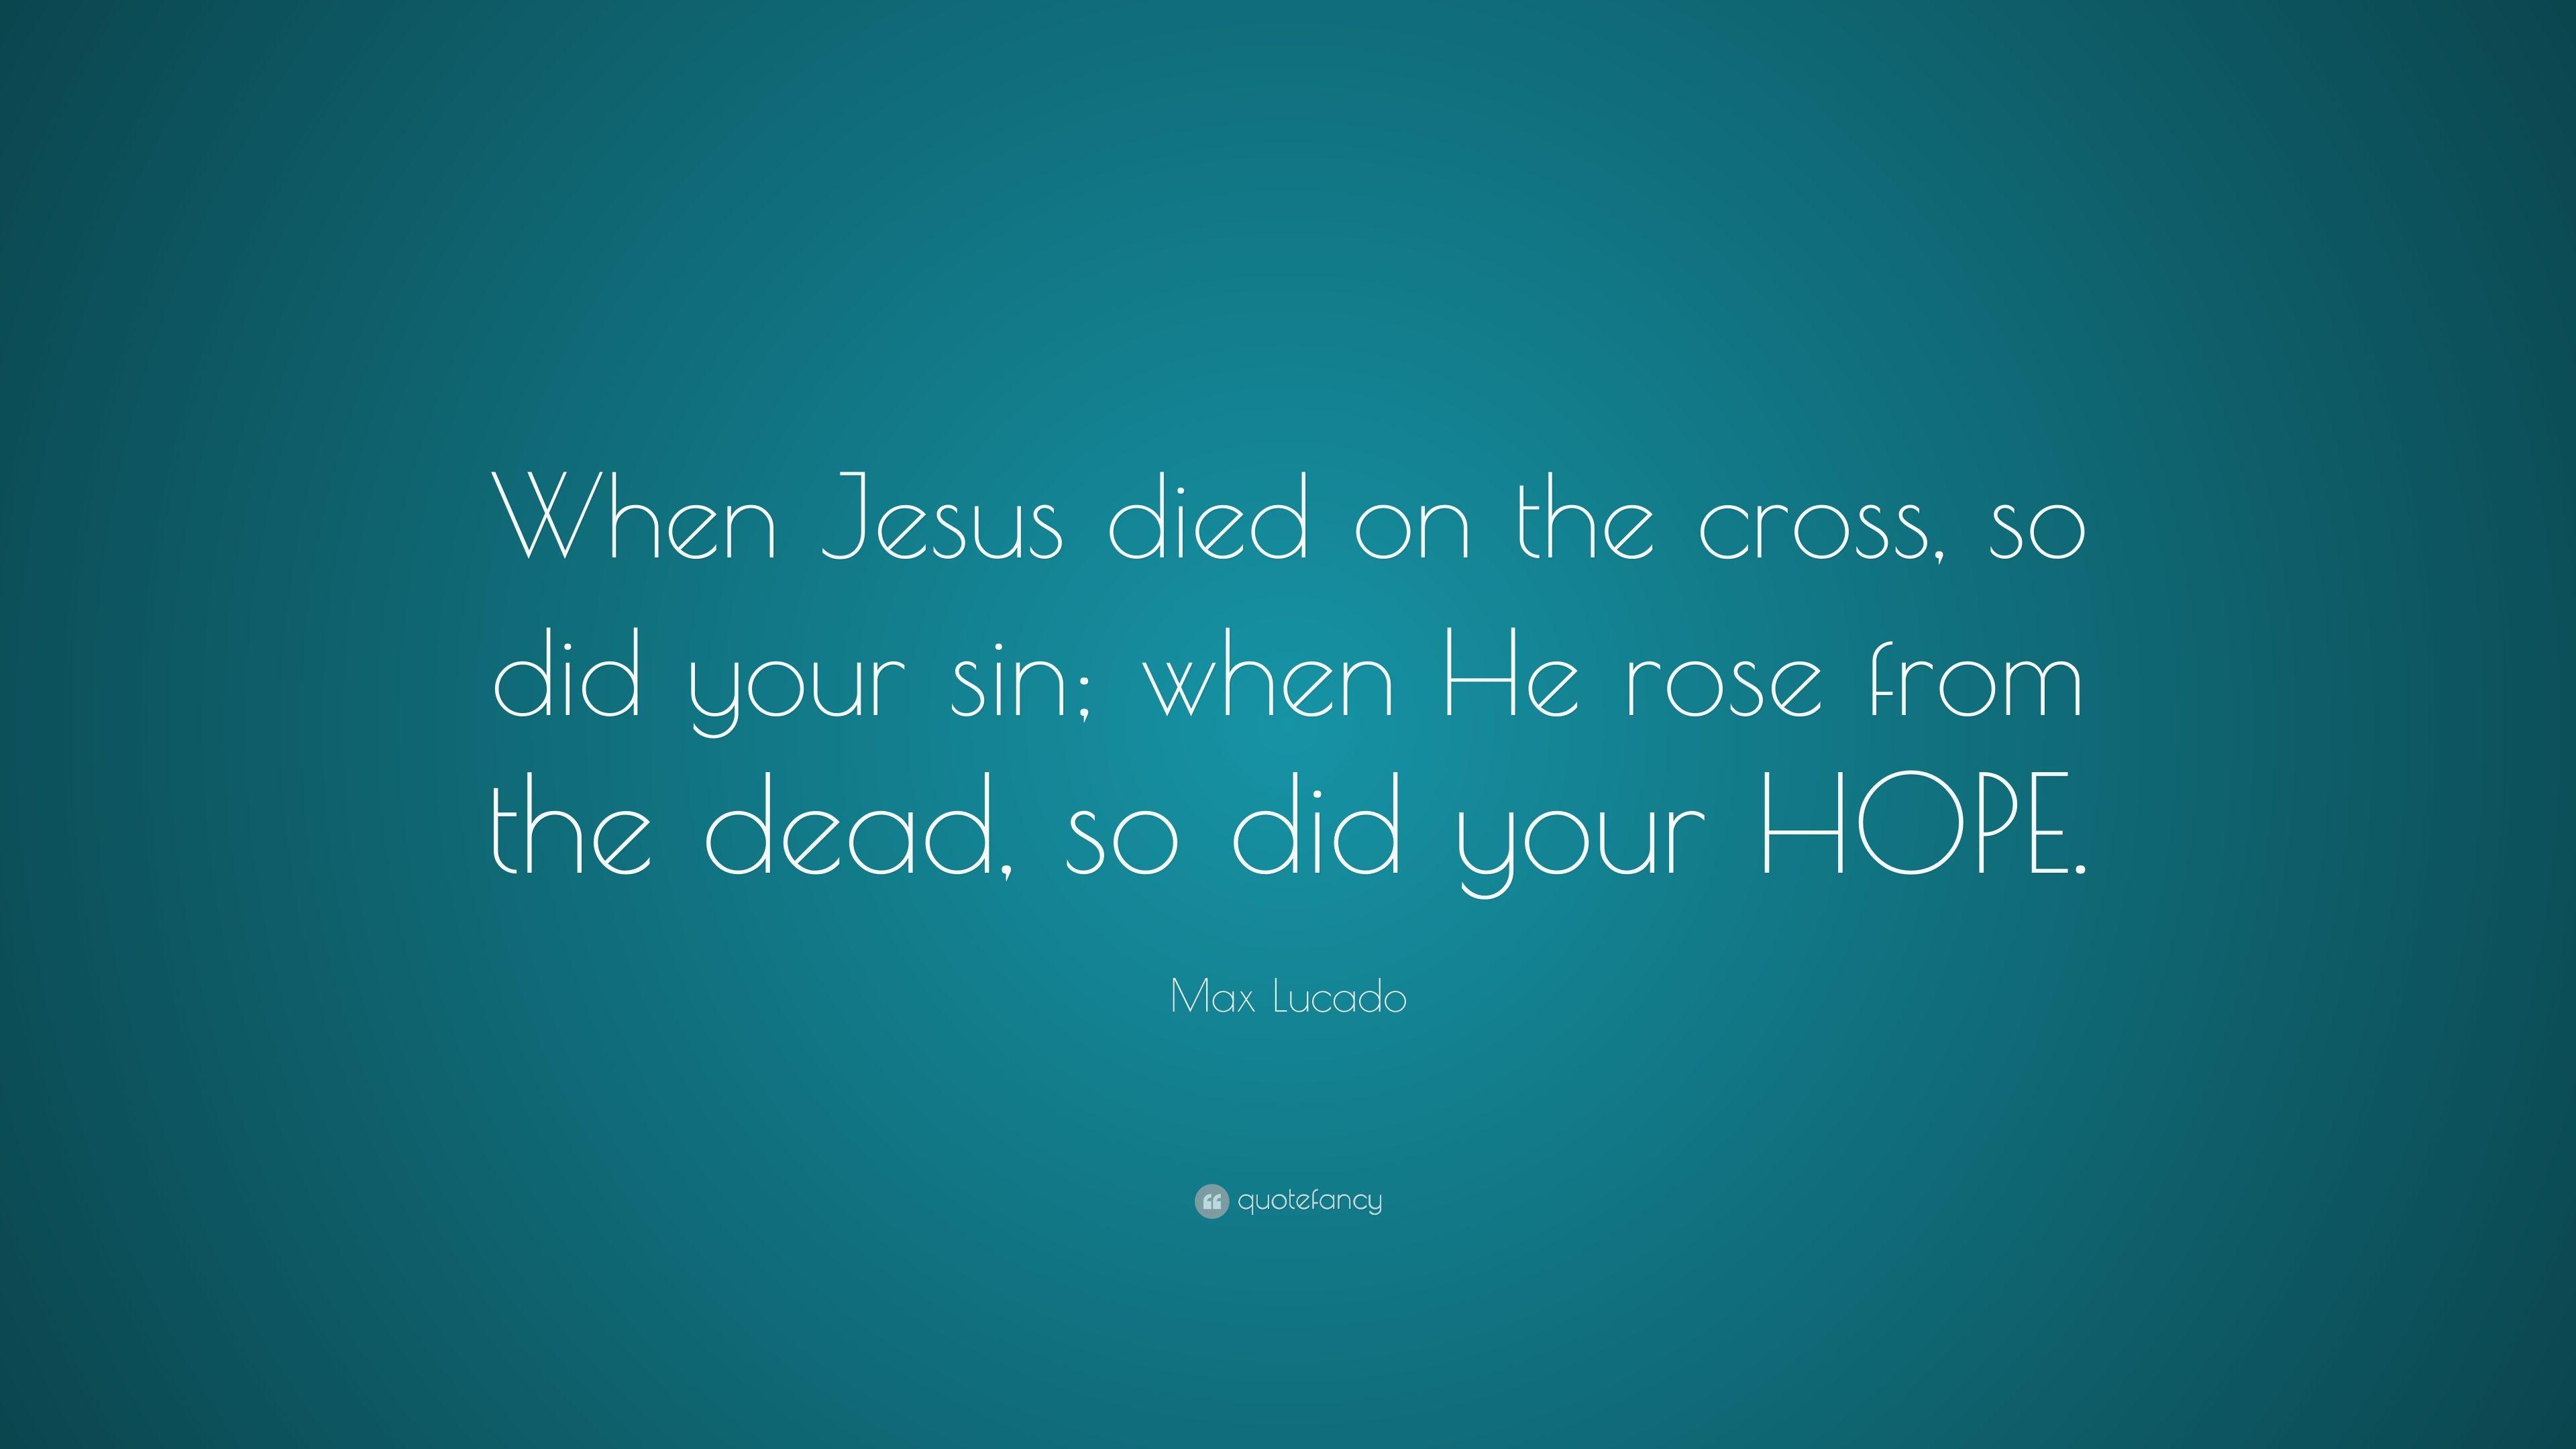 Max Lucado Quote: “When Jesus died on the cross, so did your sin